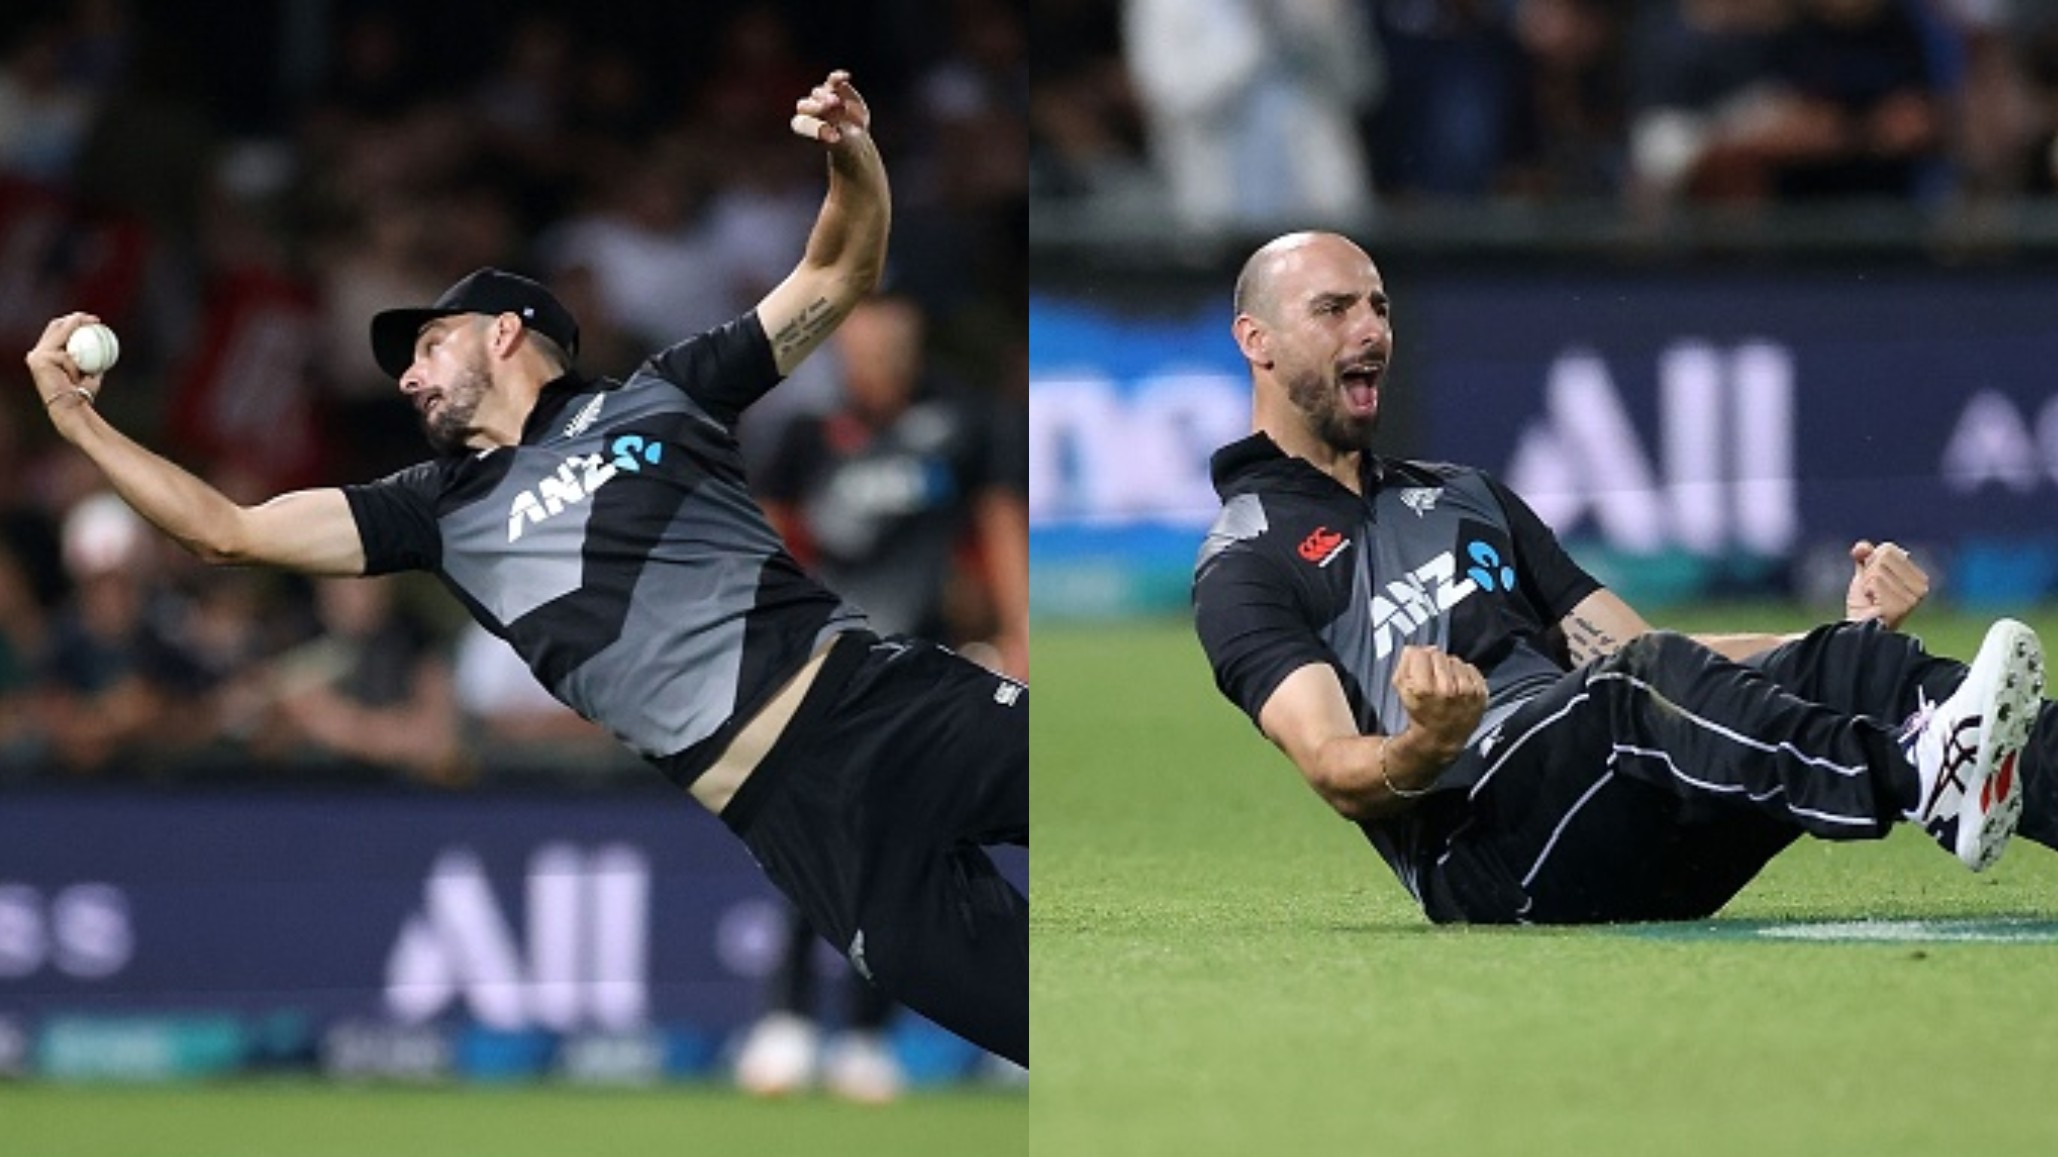 NZ v PAK 2020-21: WATCH- Daryl Mitchell takes ‘catch of the summer’ to get rid of Haider Ali